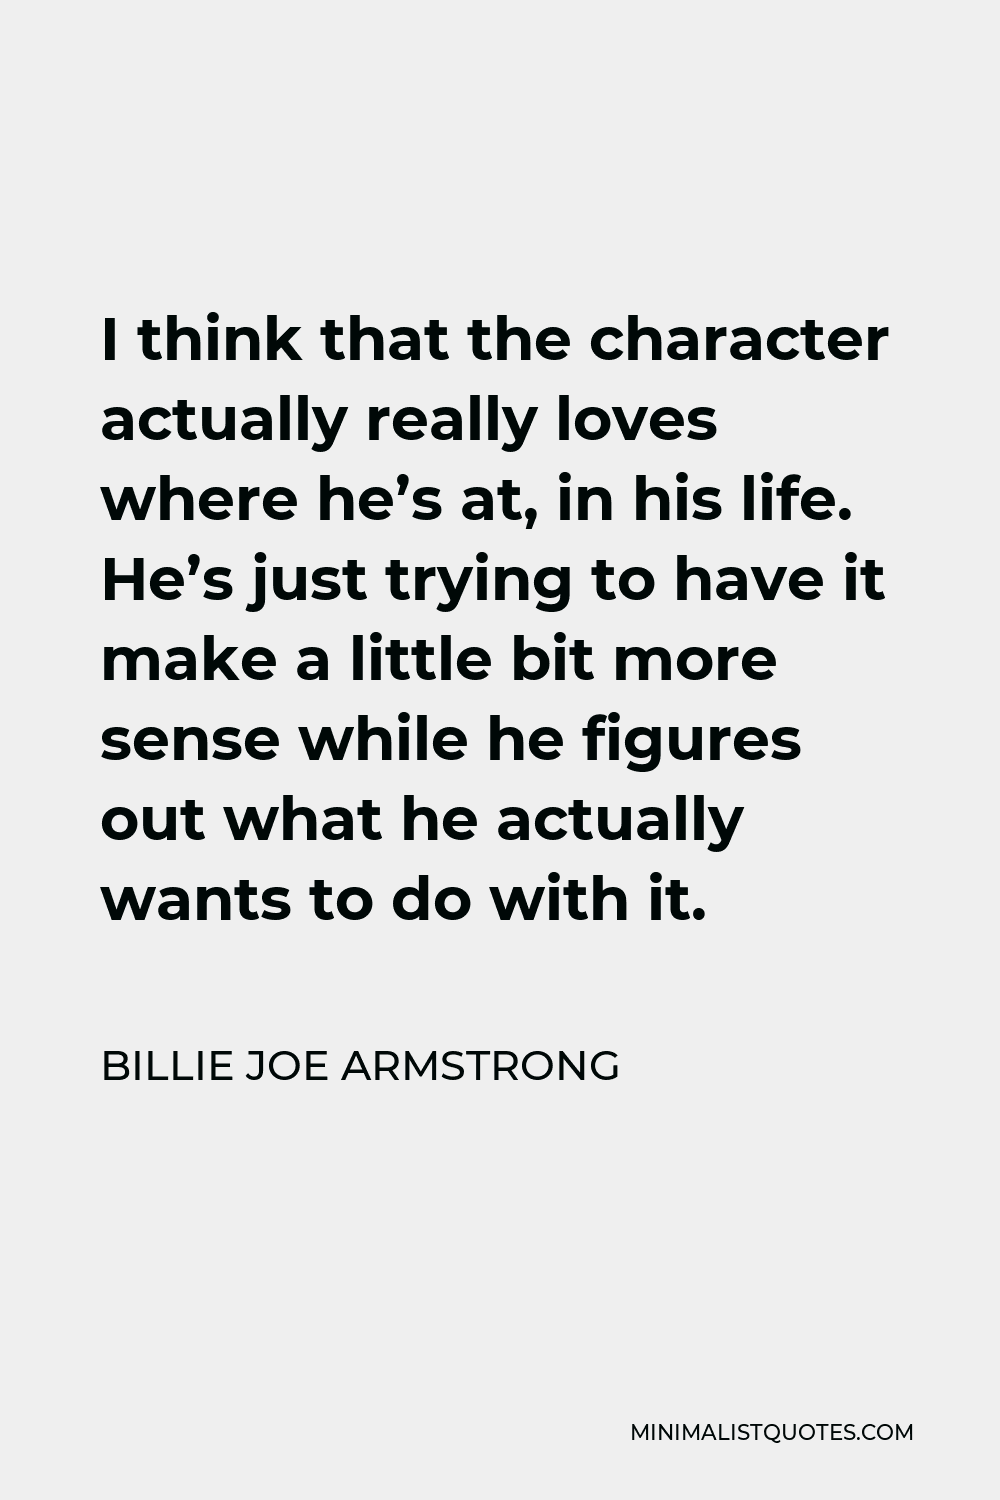 Billie Joe Armstrong Quote - I think that the character actually really loves where he’s at, in his life. He’s just trying to have it make a little bit more sense while he figures out what he actually wants to do with it.